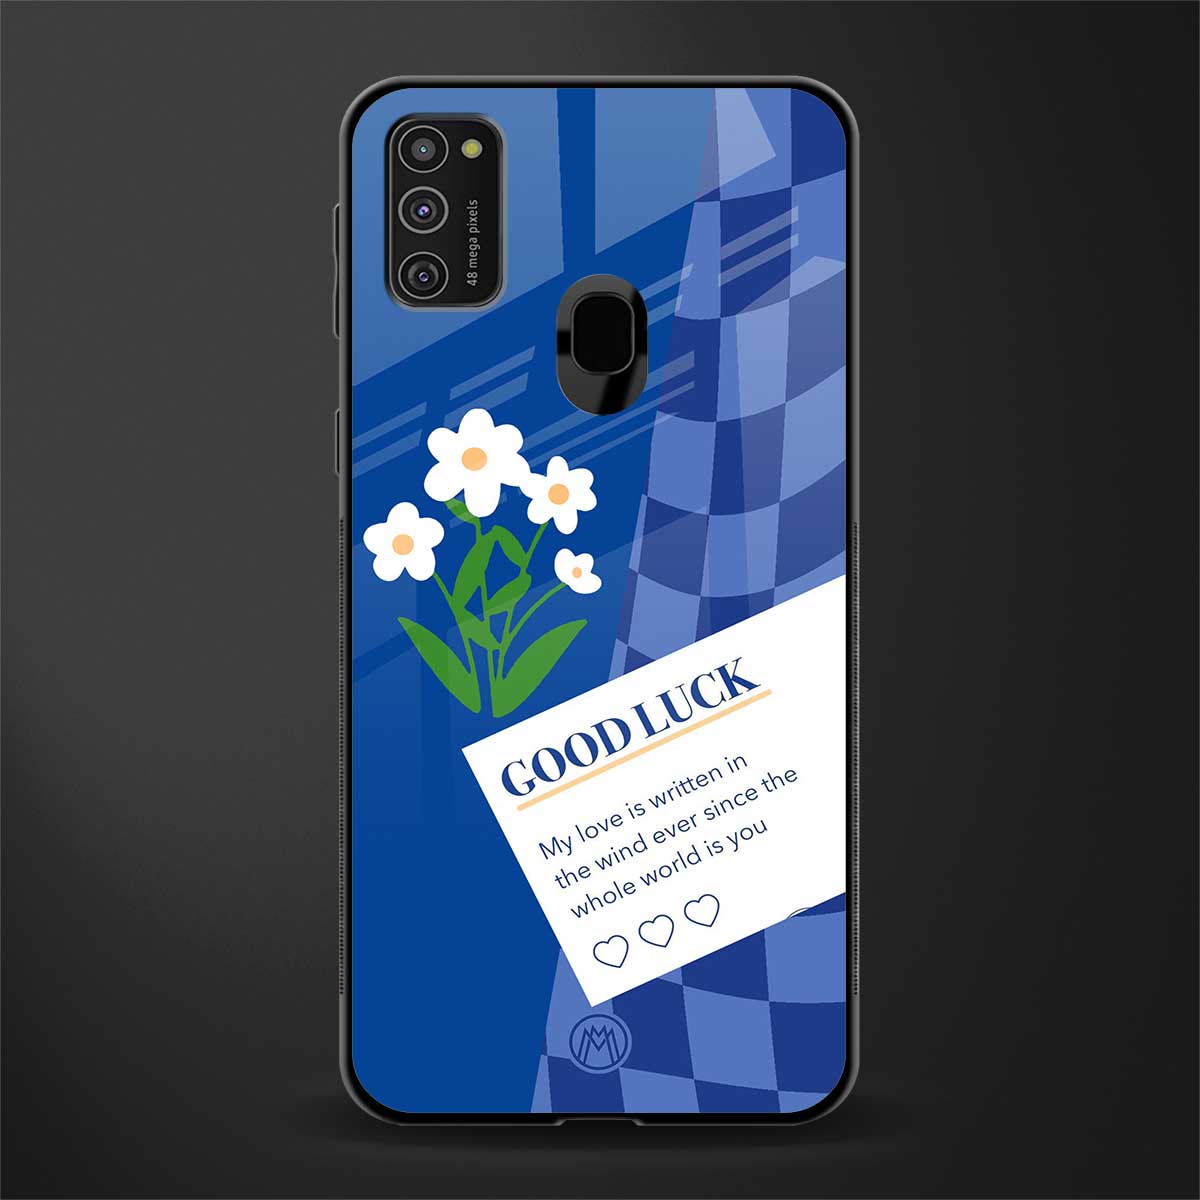 you're my world blue edition glass case for samsung galaxy m30s image